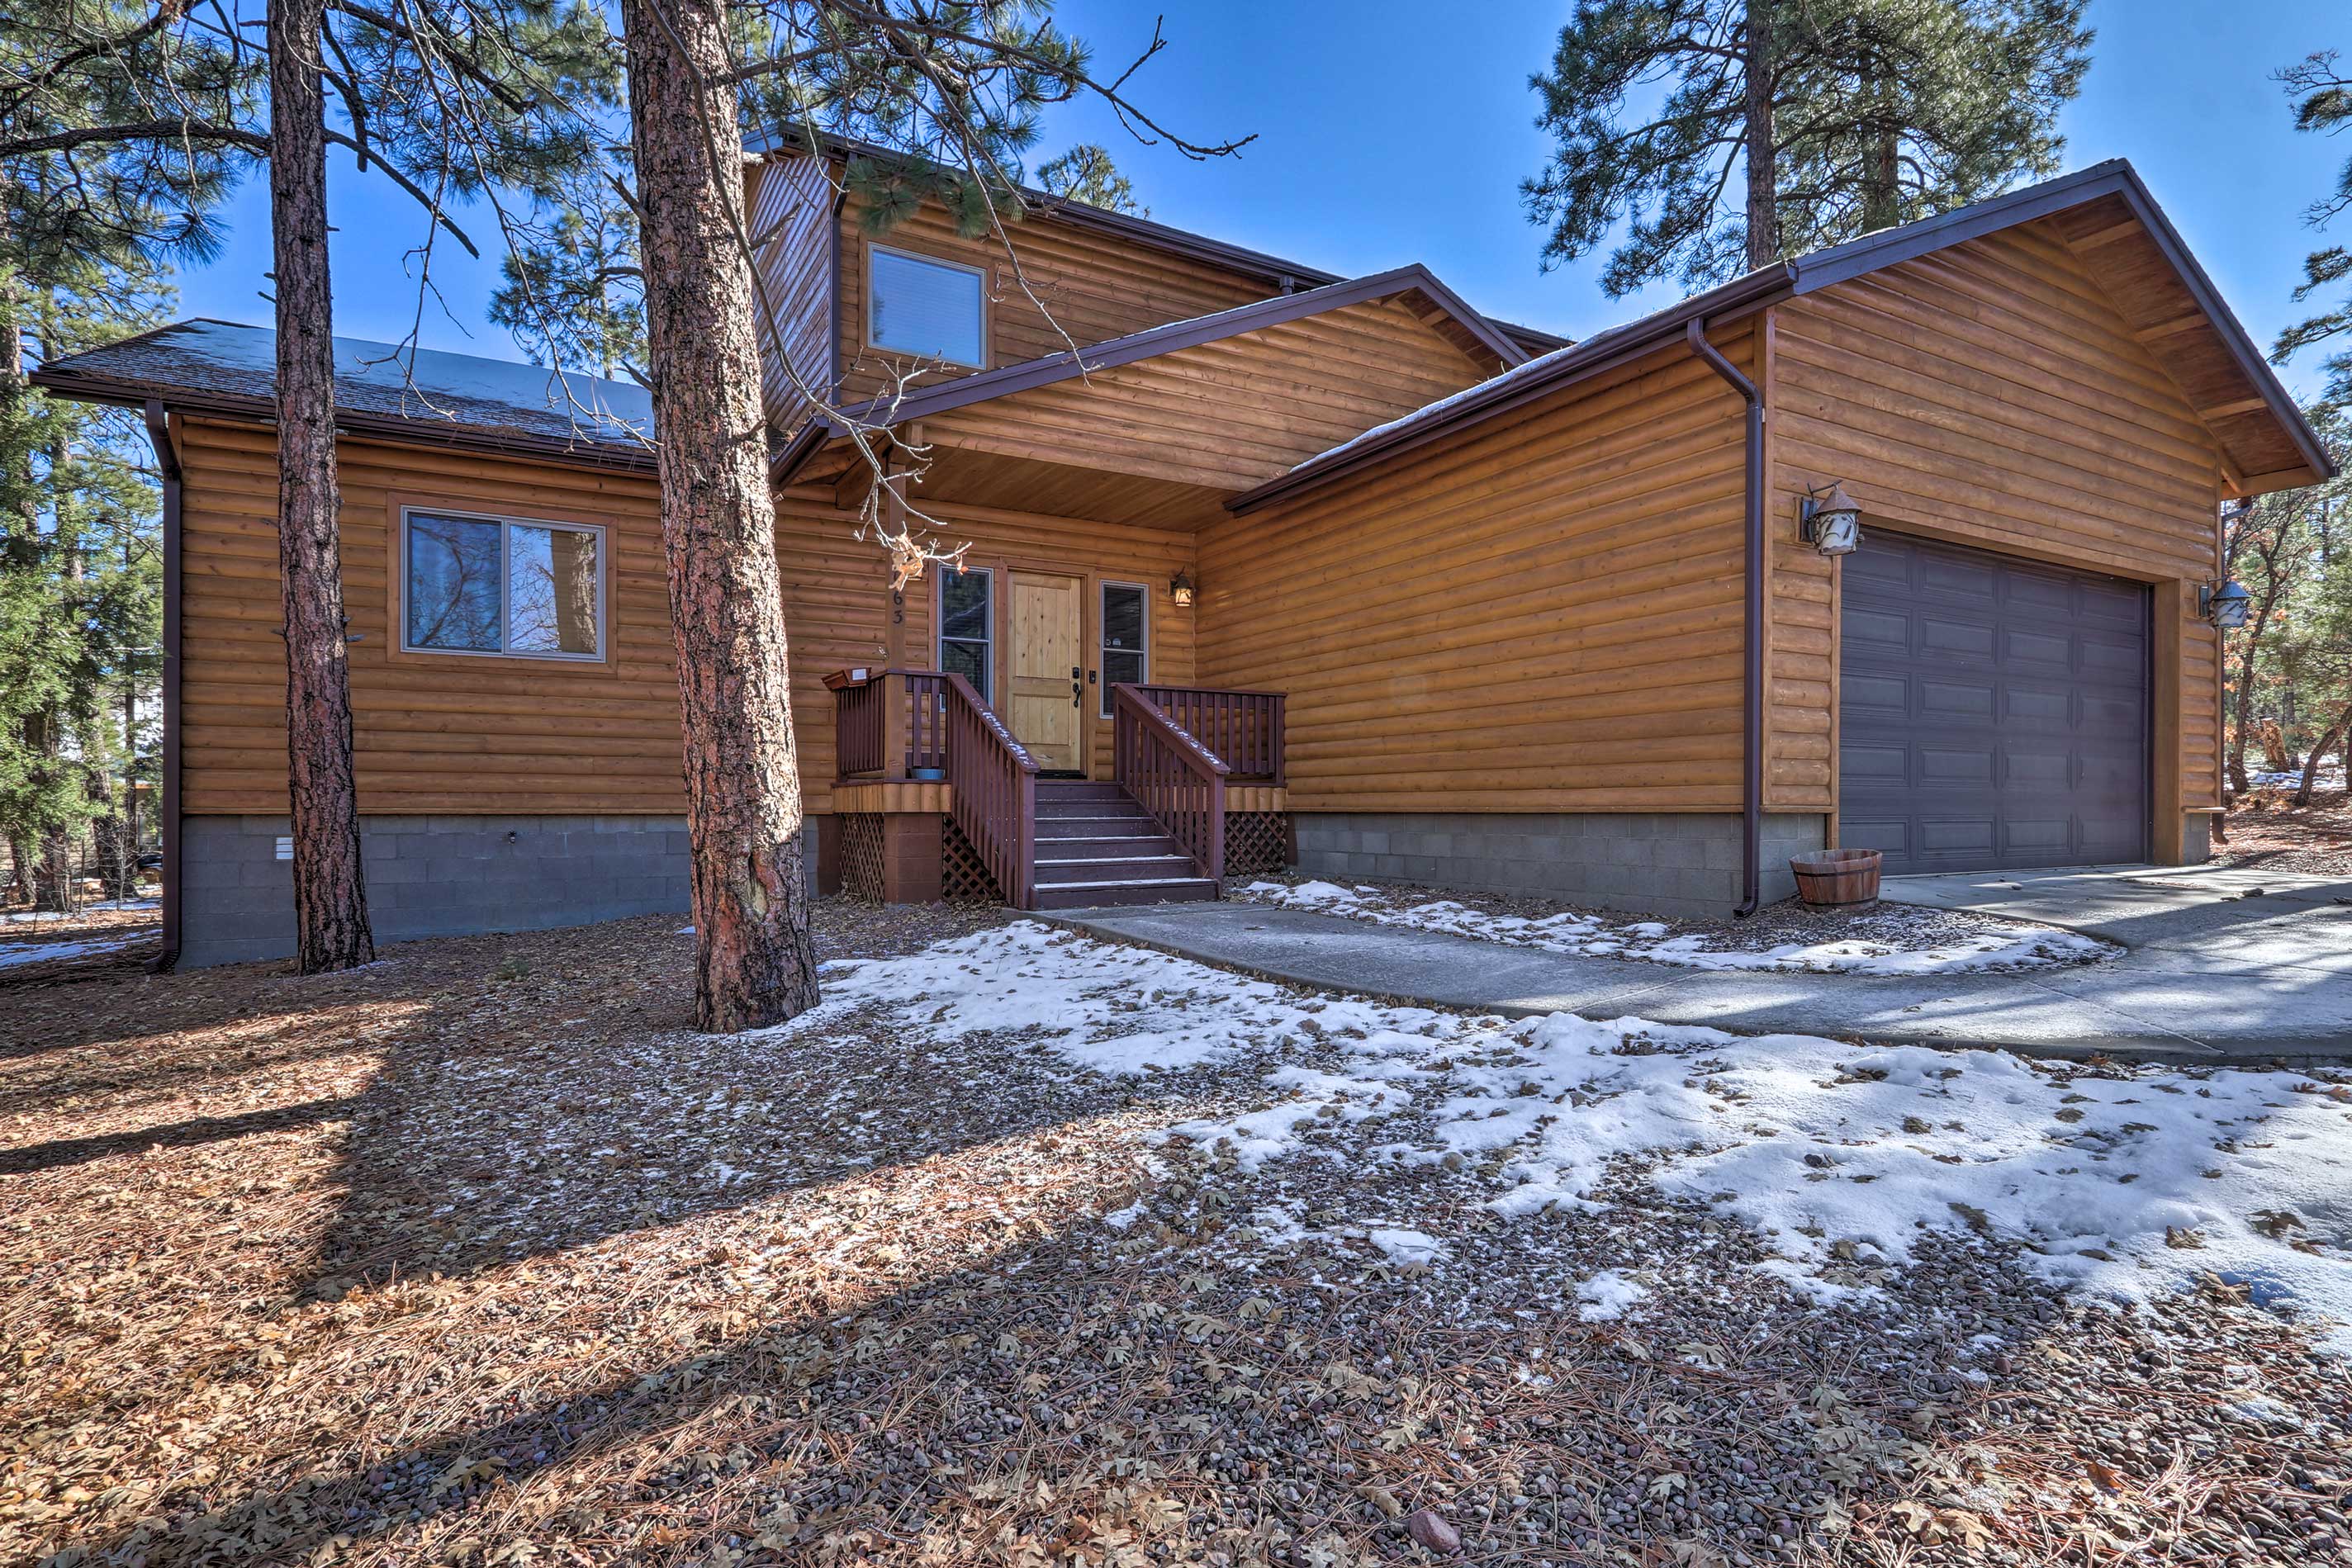 Pinetop-Lakeside Vacation Rental | 3BR | 2.5BA | 1,900 Sq Ft | Stairs Required